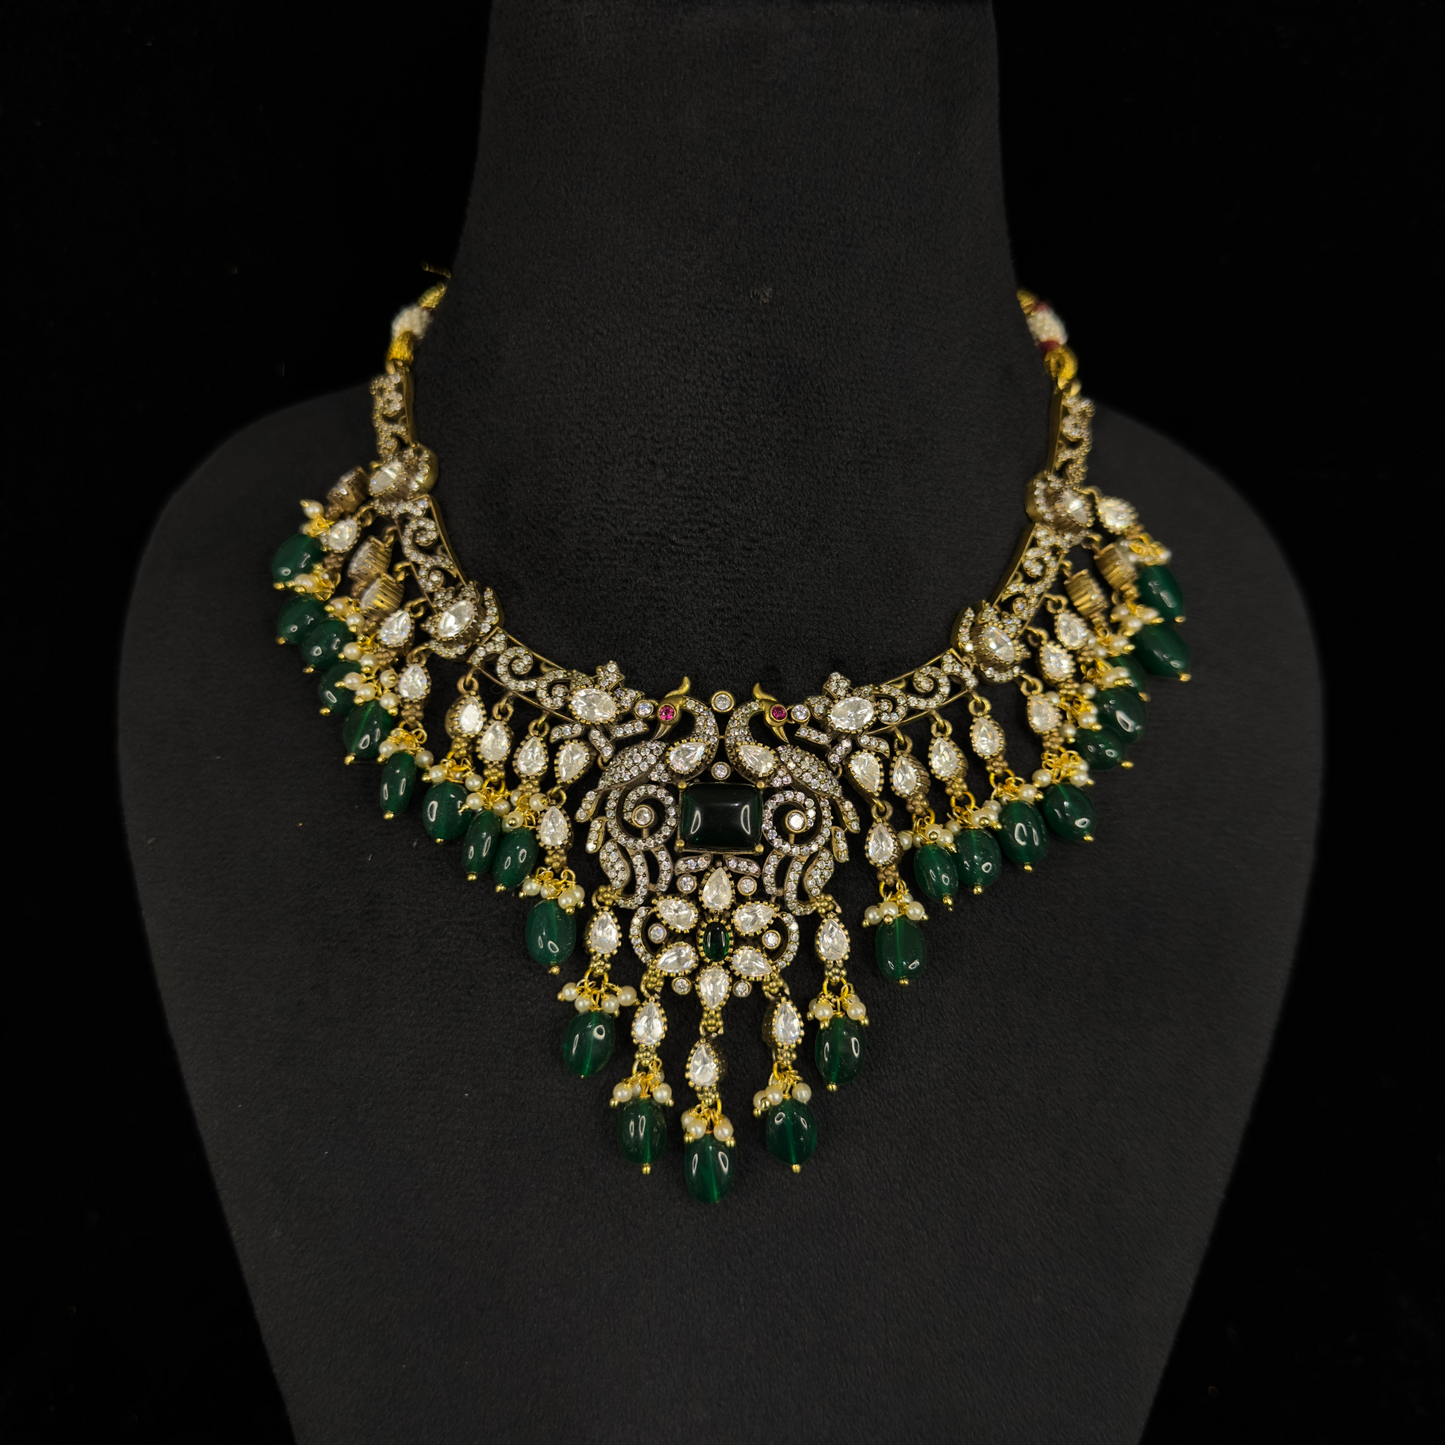 Victorian Peacock Kanti Necklace with matching earrings